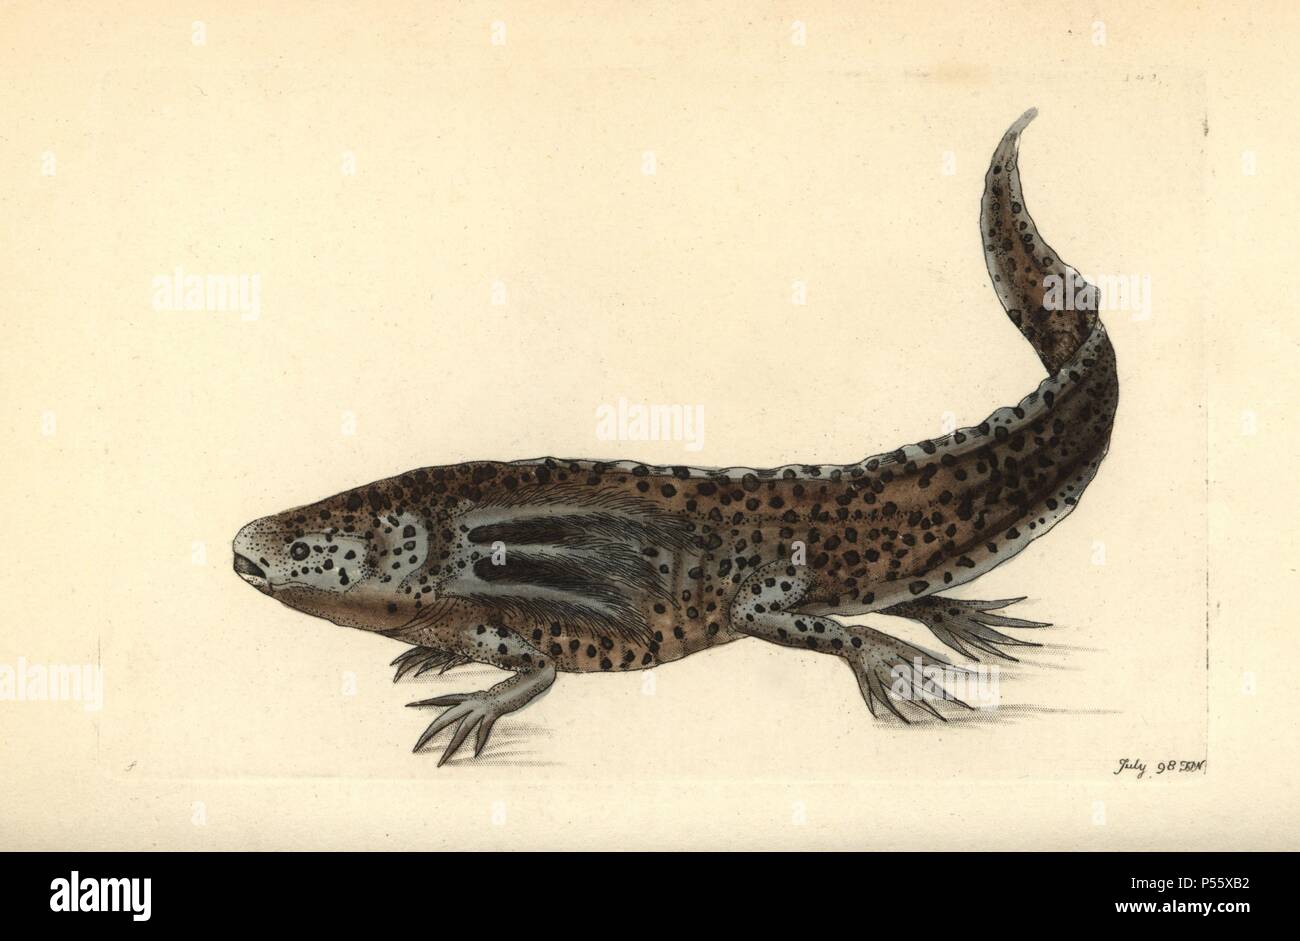 Mole salamander or wooper looper, Ambystoma mexicanum. Critically endangered. Handcolored copperplate engraving by Frederick Polydore Nodder from an illustration by George Shaw from George Shaw and Frederick Nodder's 'Naturalist's Miscellany,' London, 1798. Stock Photo